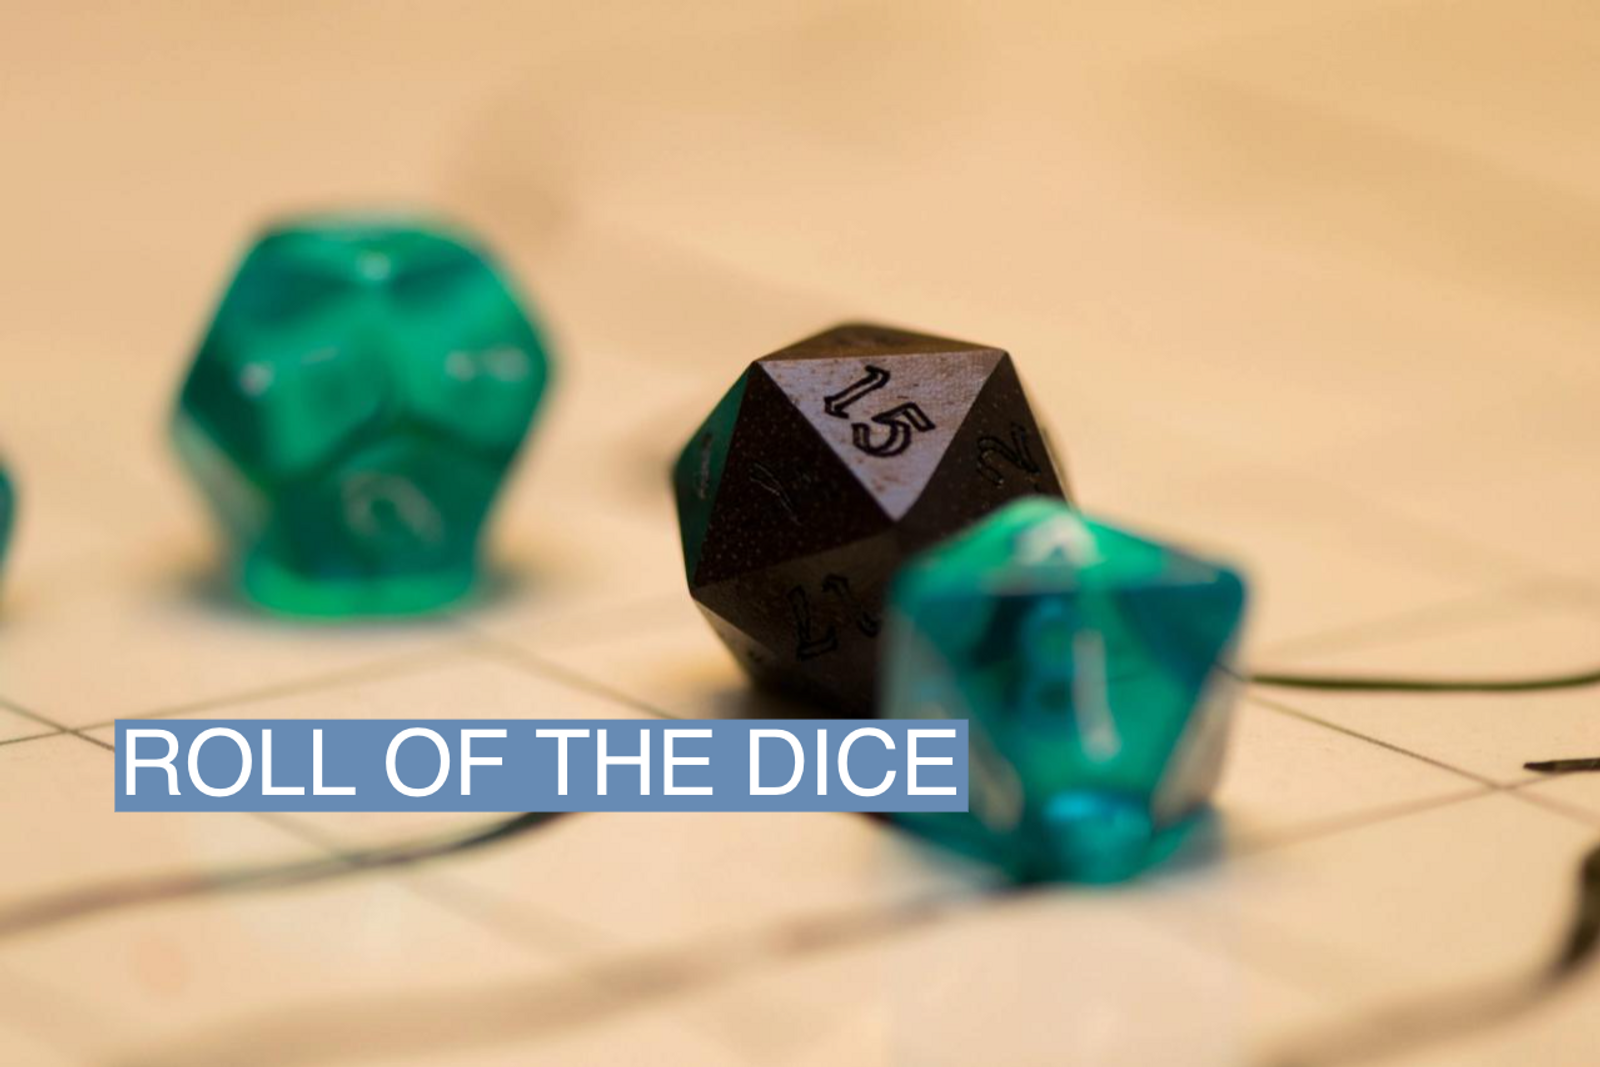 D20 dice used in Dungeons & Dragons are shown on a table top.